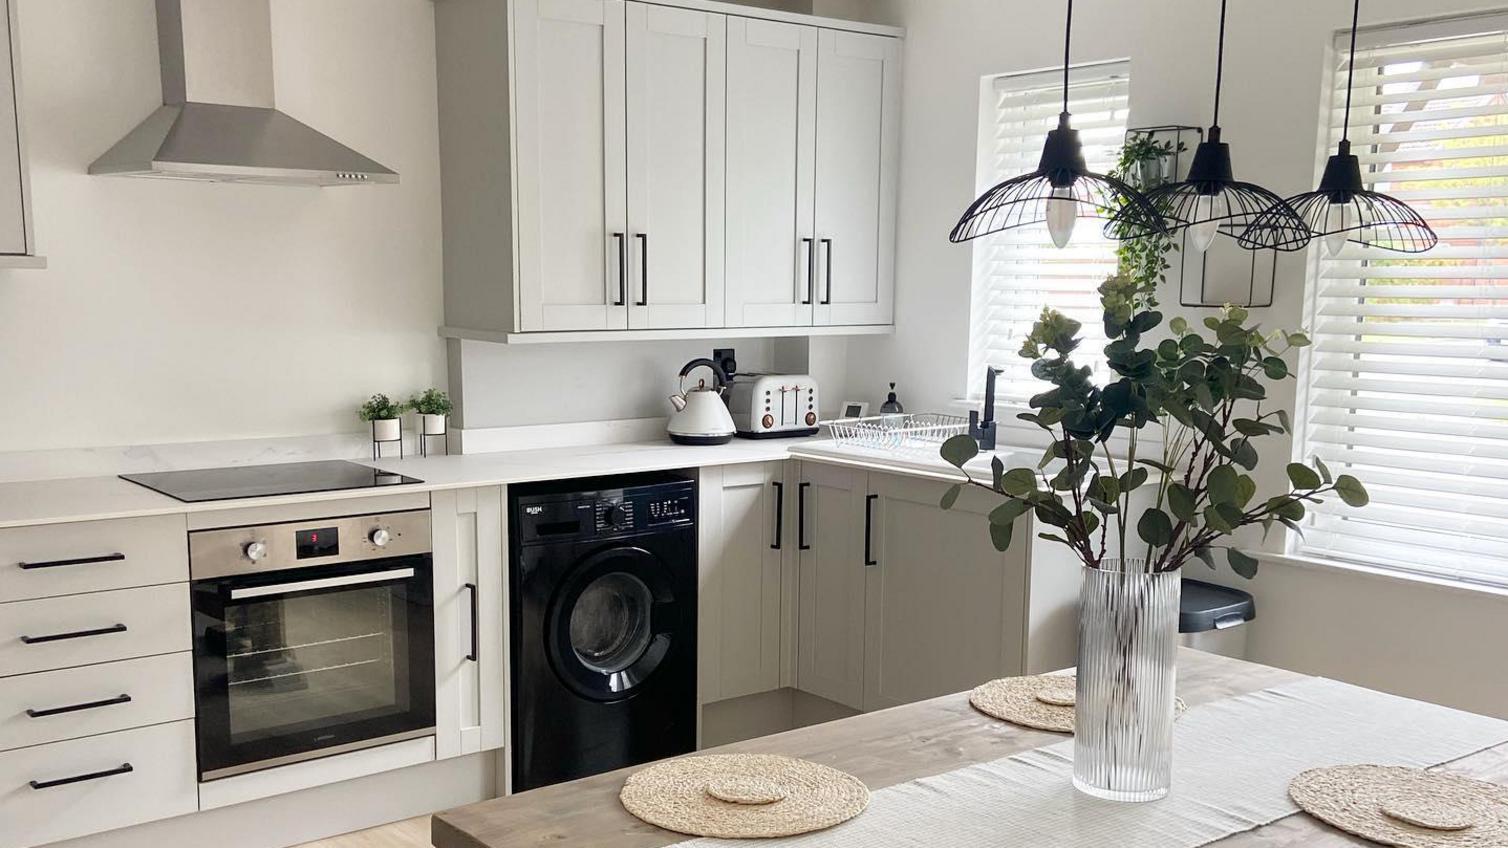 Scandi shaker kitchen makeover using Witney dove-grey cupboard doors. Includes timber floors and black, d-shape handles.